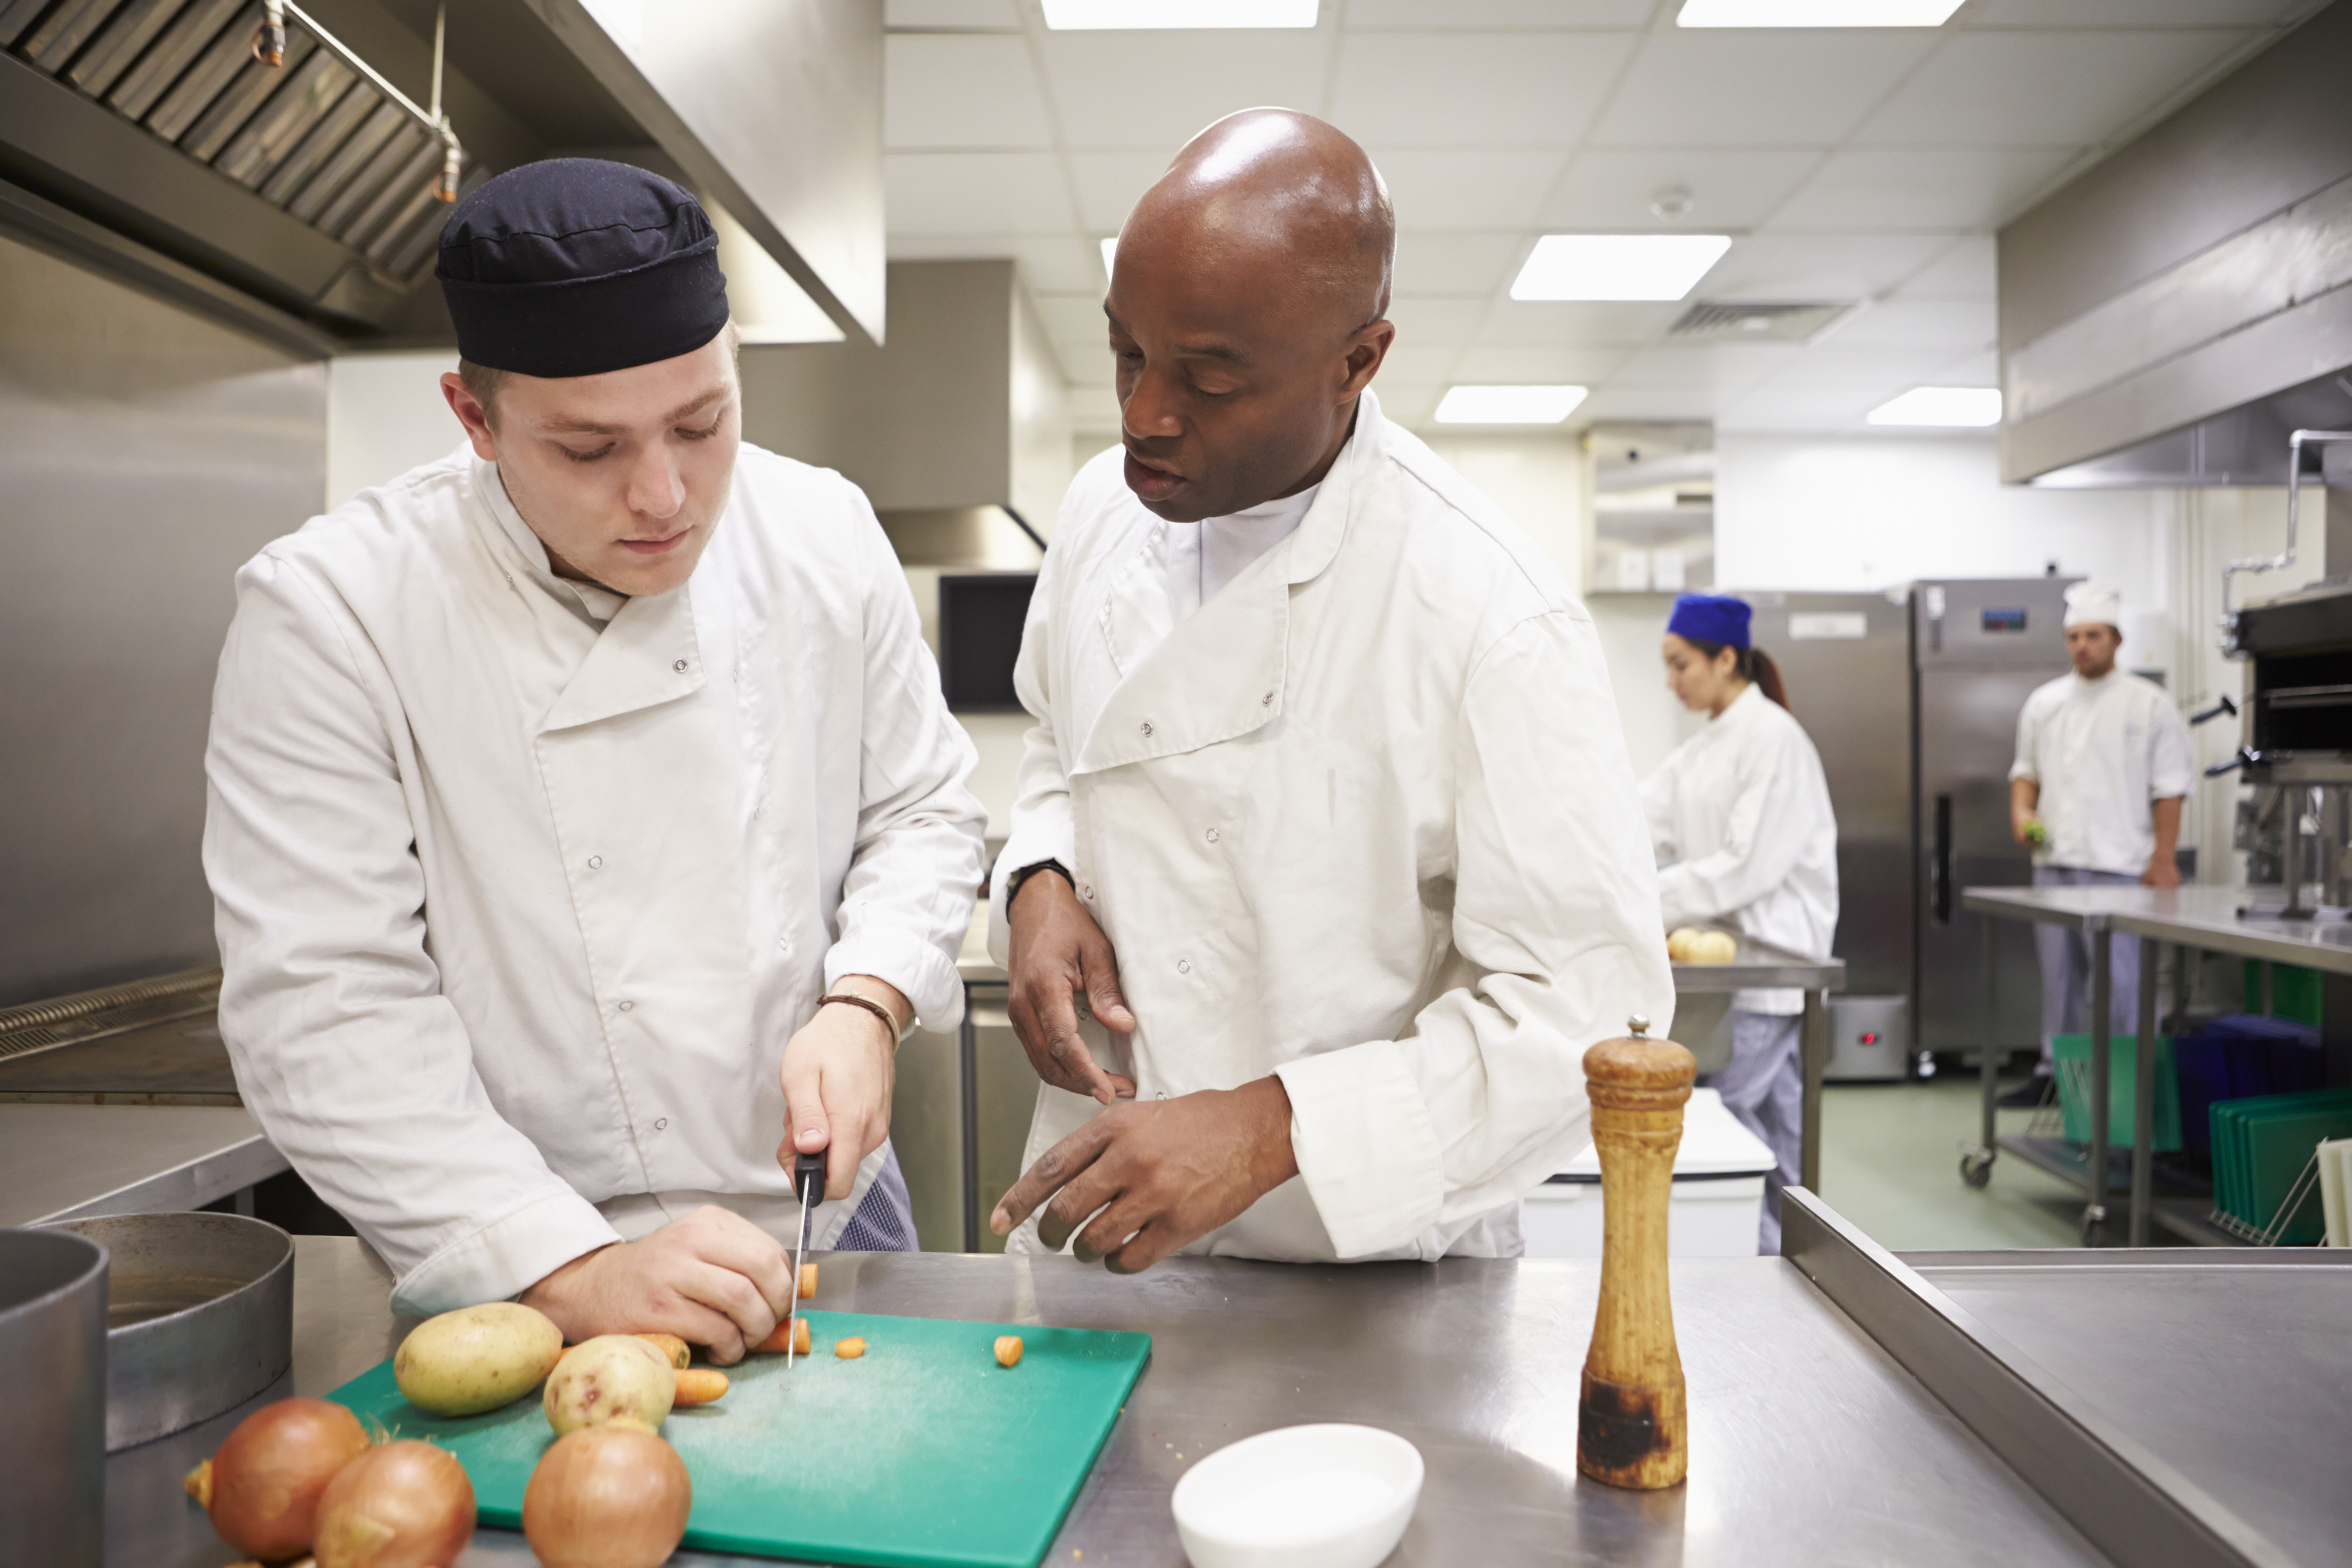 Two chefs, one instructing the other, preparing food in a commercial kitchen